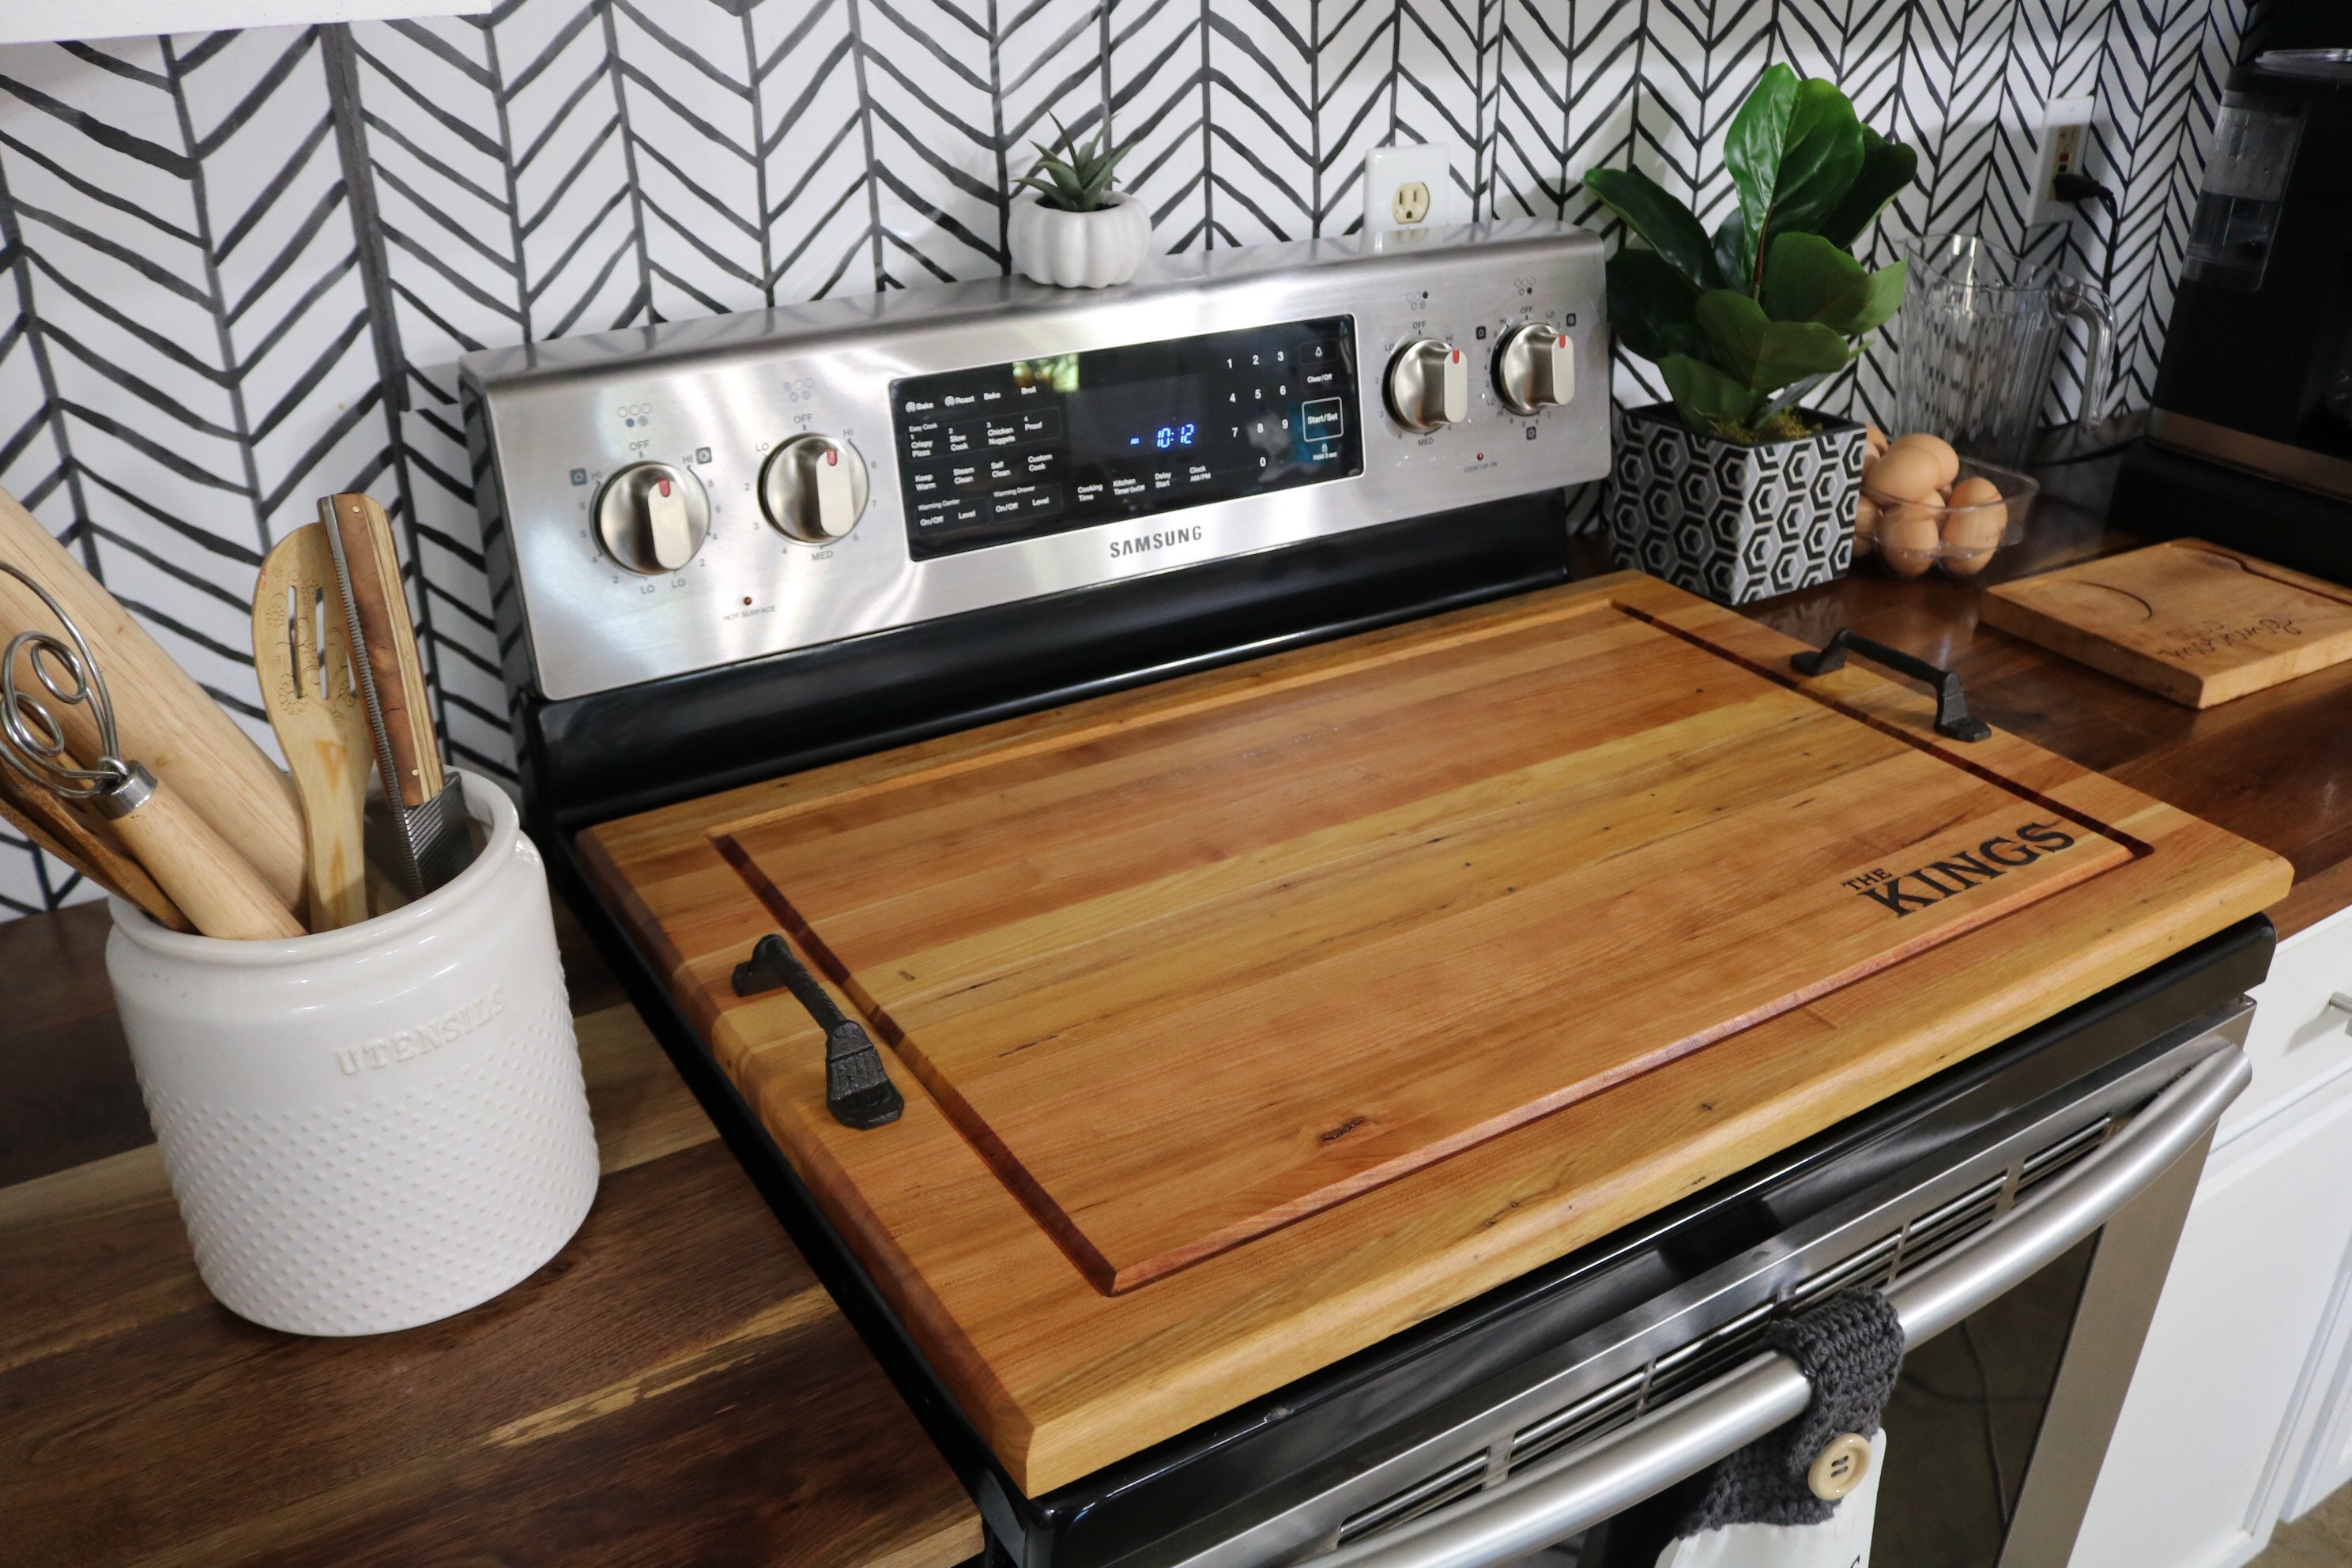 Cutting Board Gas Stove Cover, Cherry/oak, Board Butter Included Campbells  Customs 